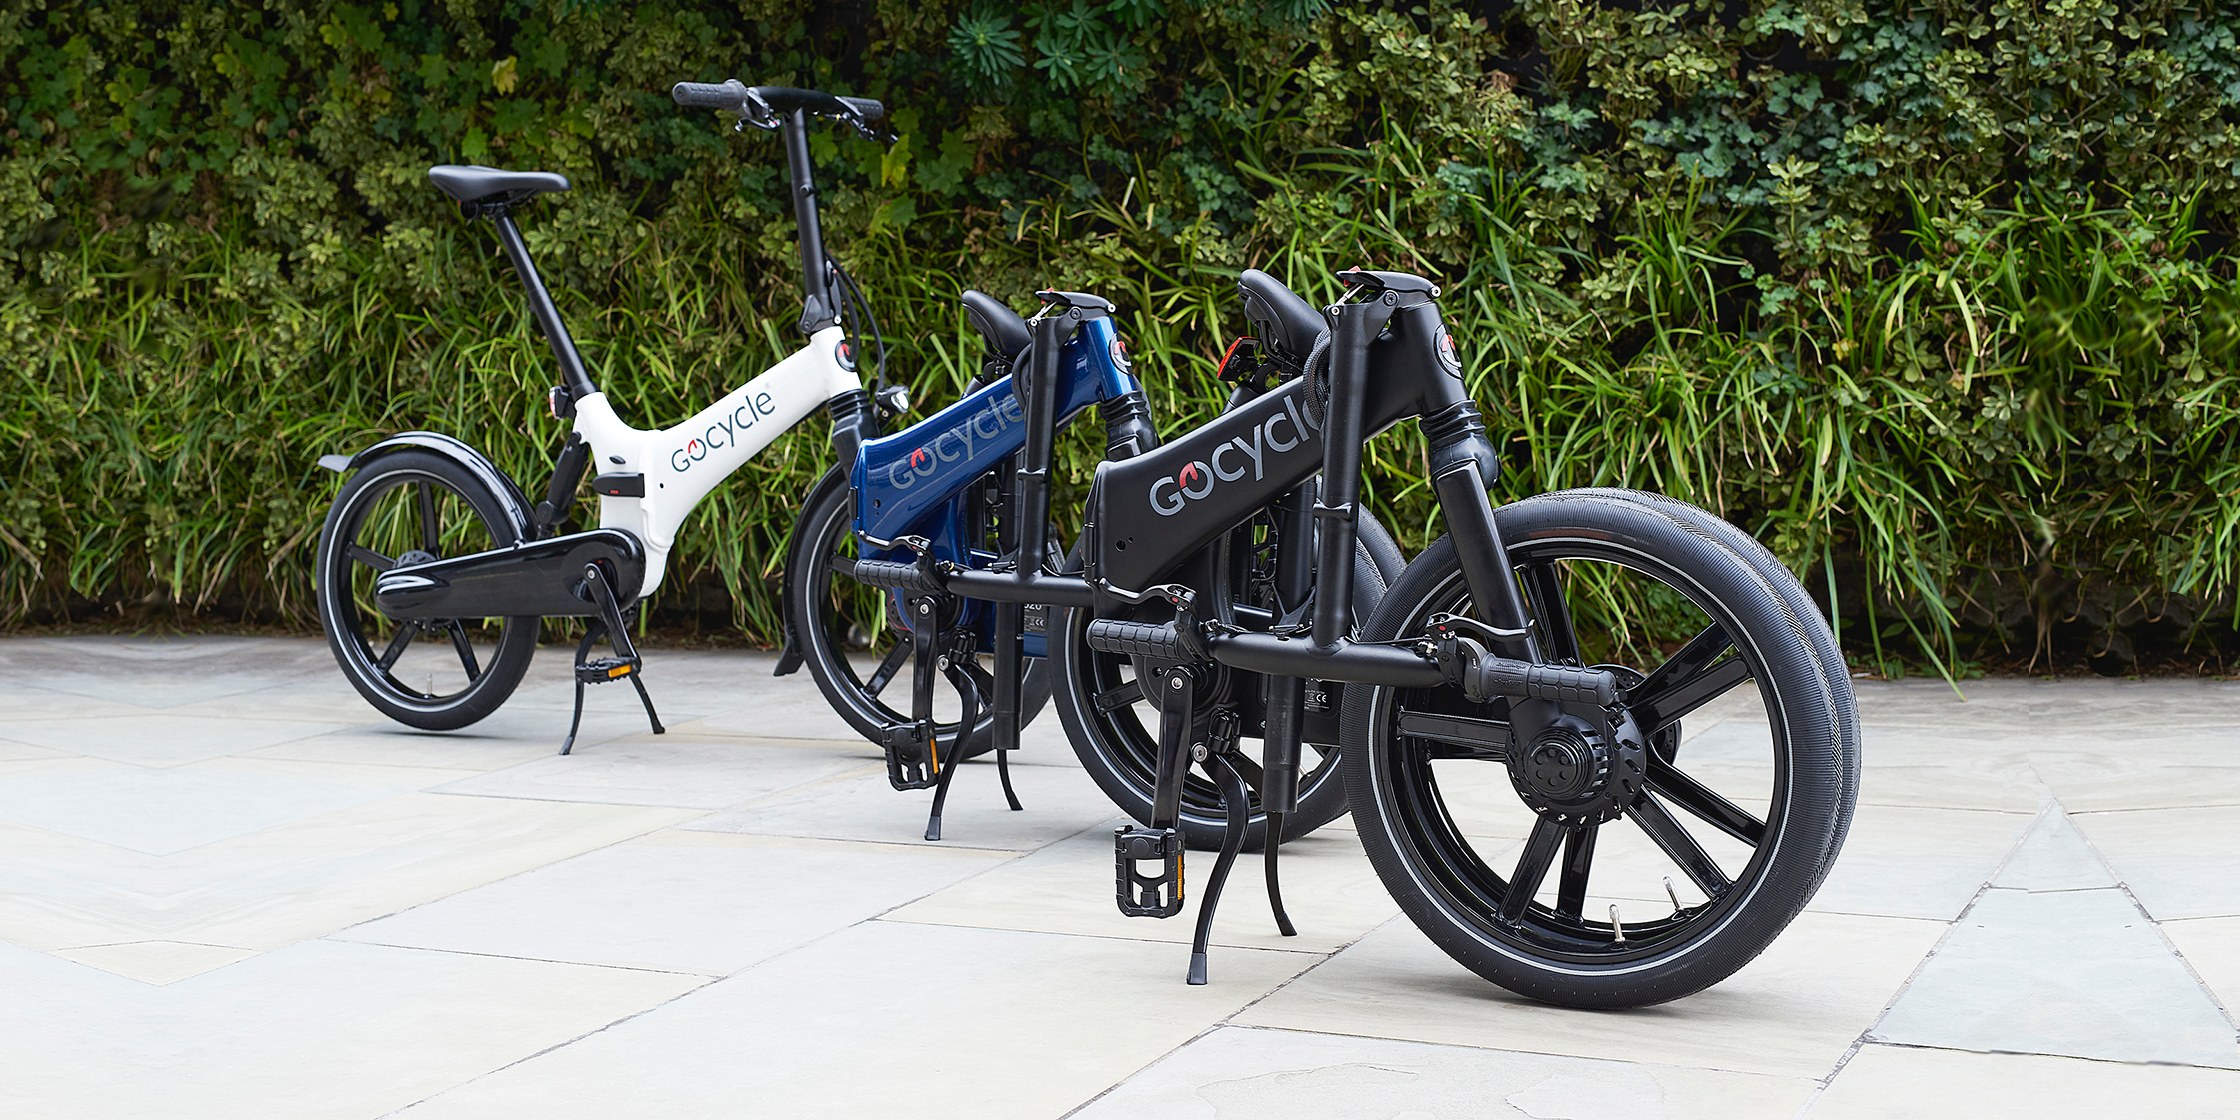 Gocycle’s new fast folding electric bicycle could be the best folding commuter yet